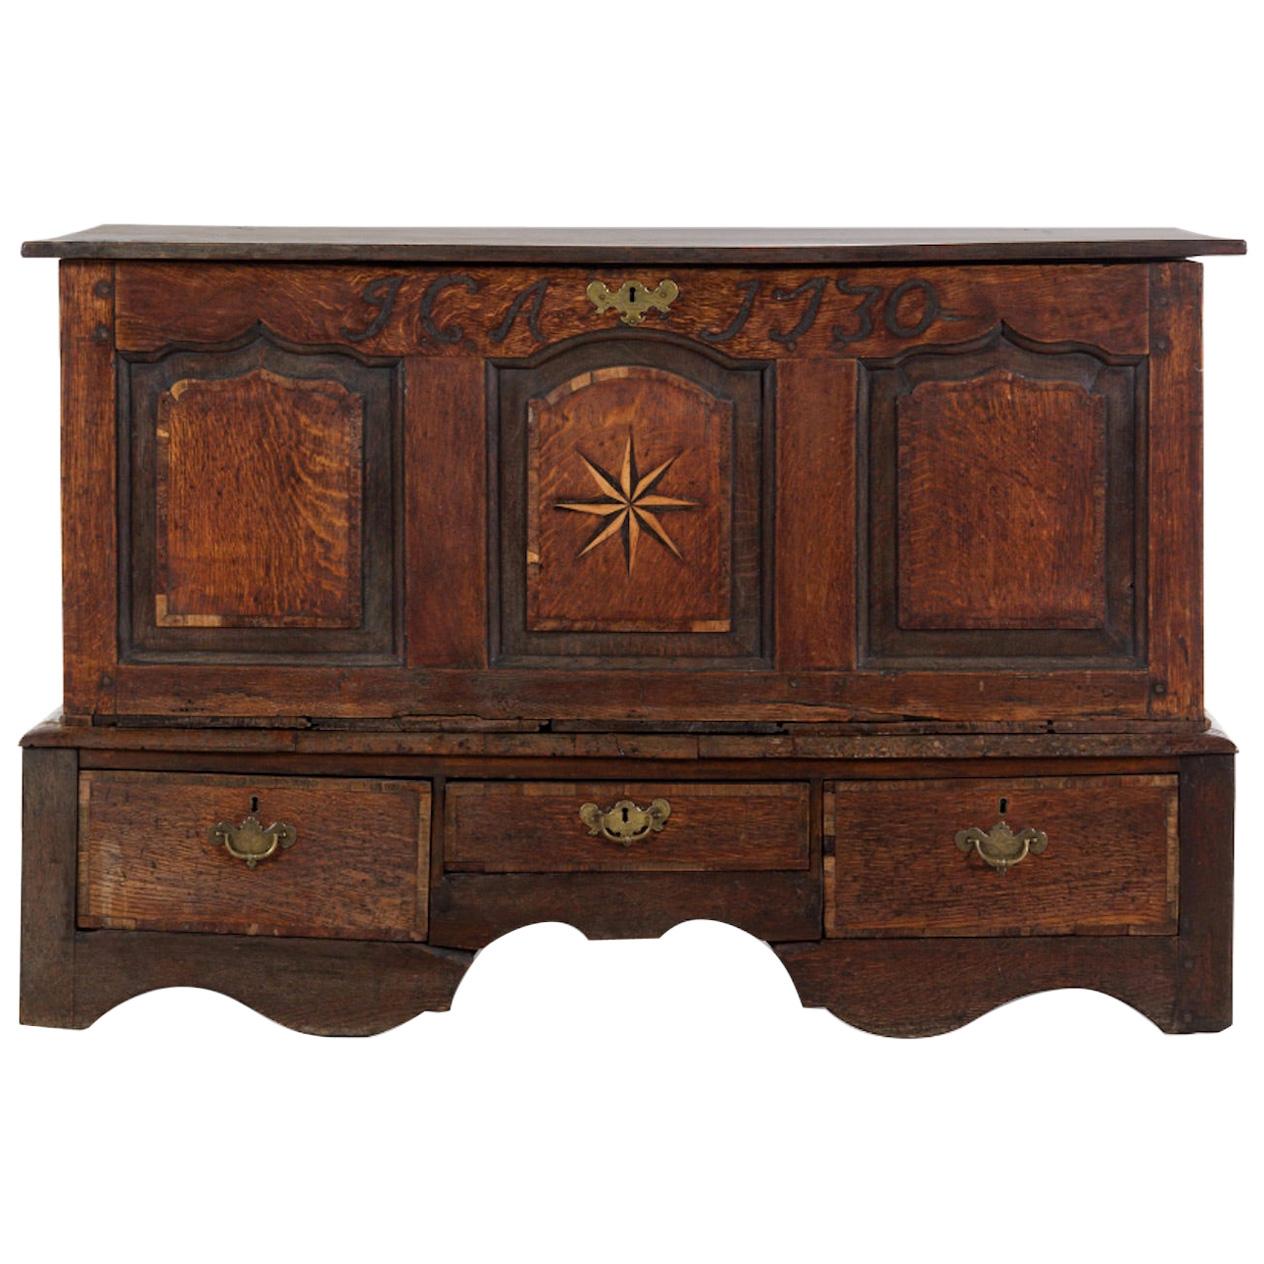 Handsome 18th Century English Oak Chest with Star Inlay, Dated 1730 Great Patina